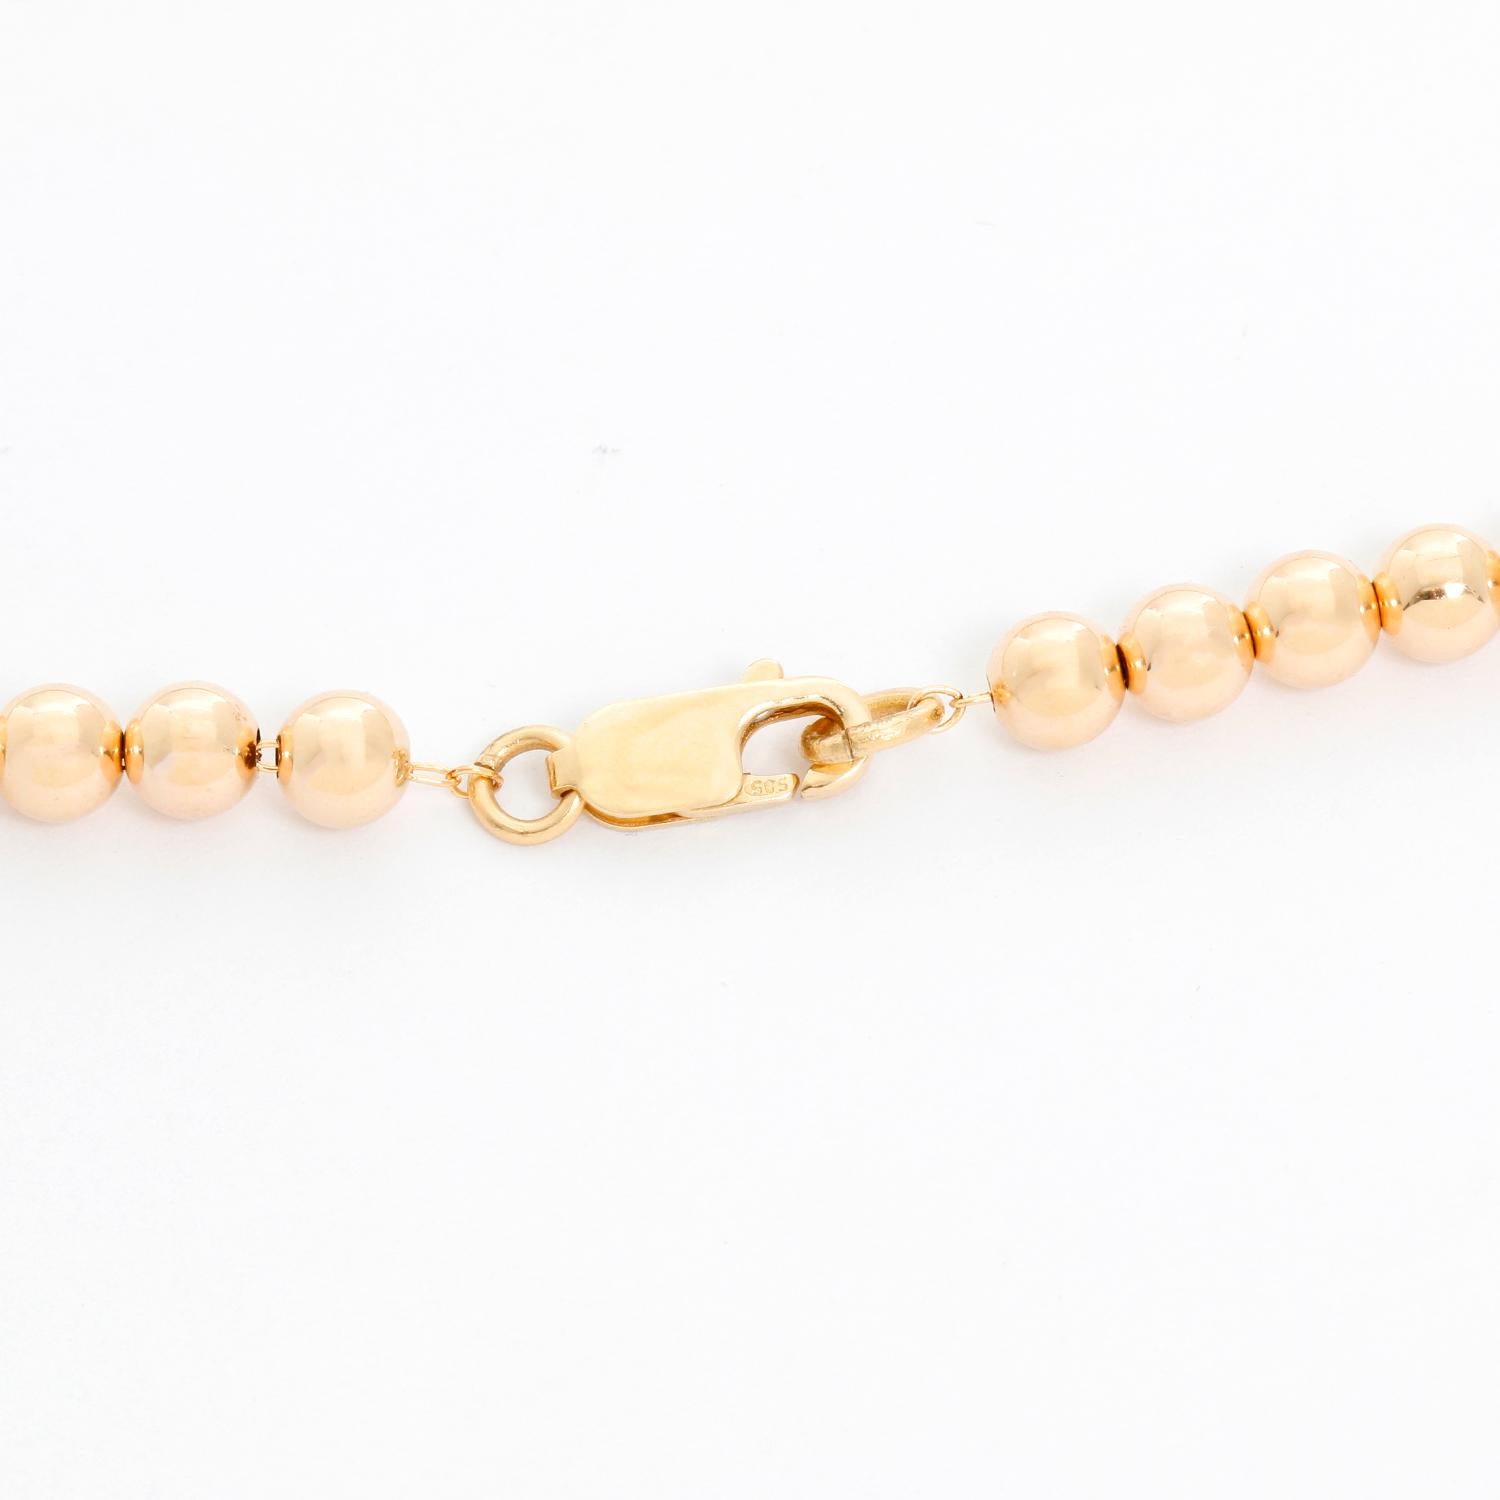 hollow gold beads necklace